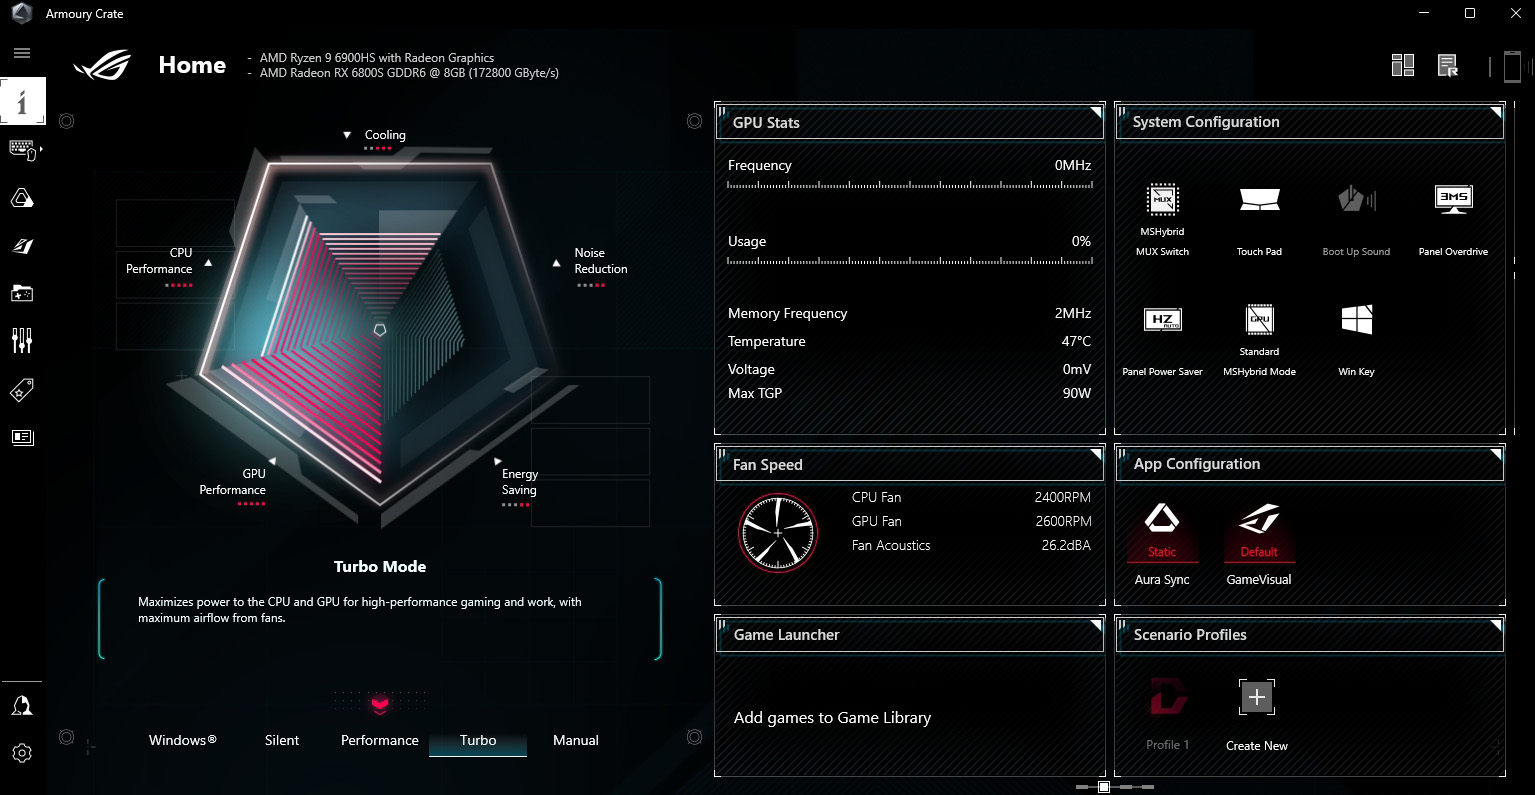 A screenshot of the Armoury Crate software with Turbo mode enabled.